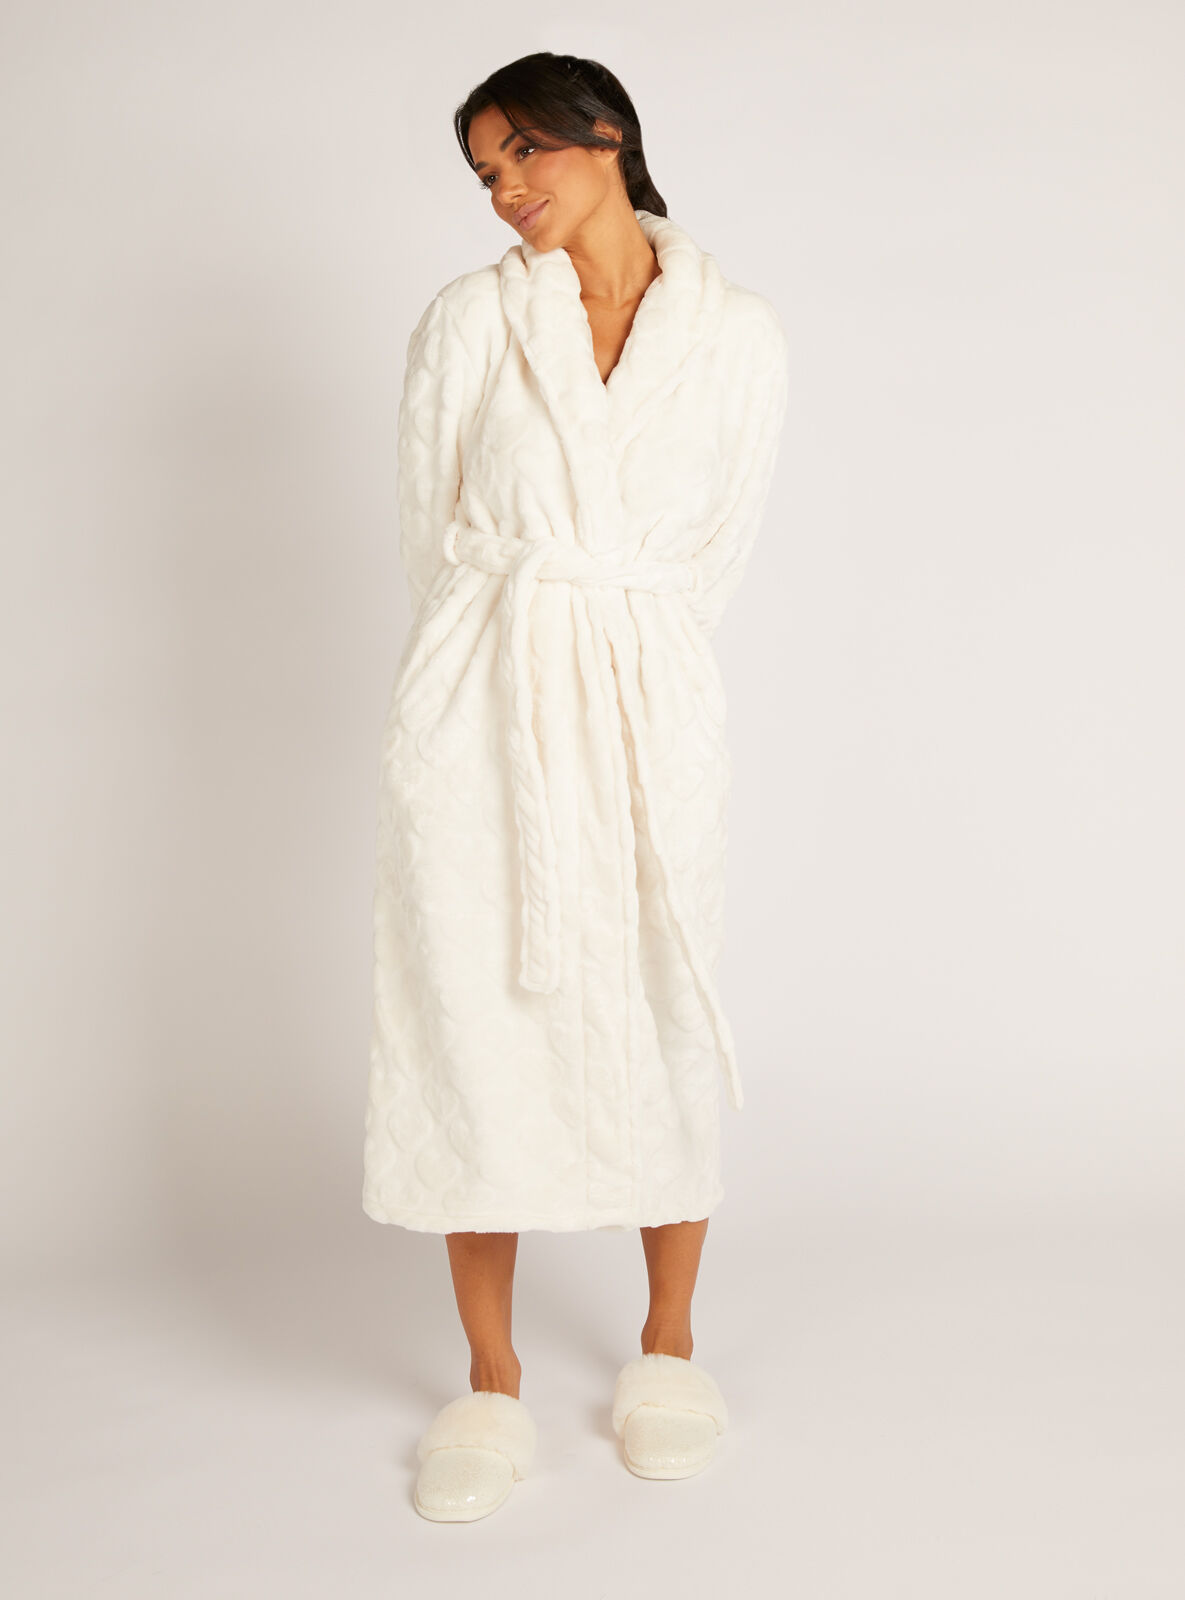 Buy Laura Ashley Dressing Gown from Next